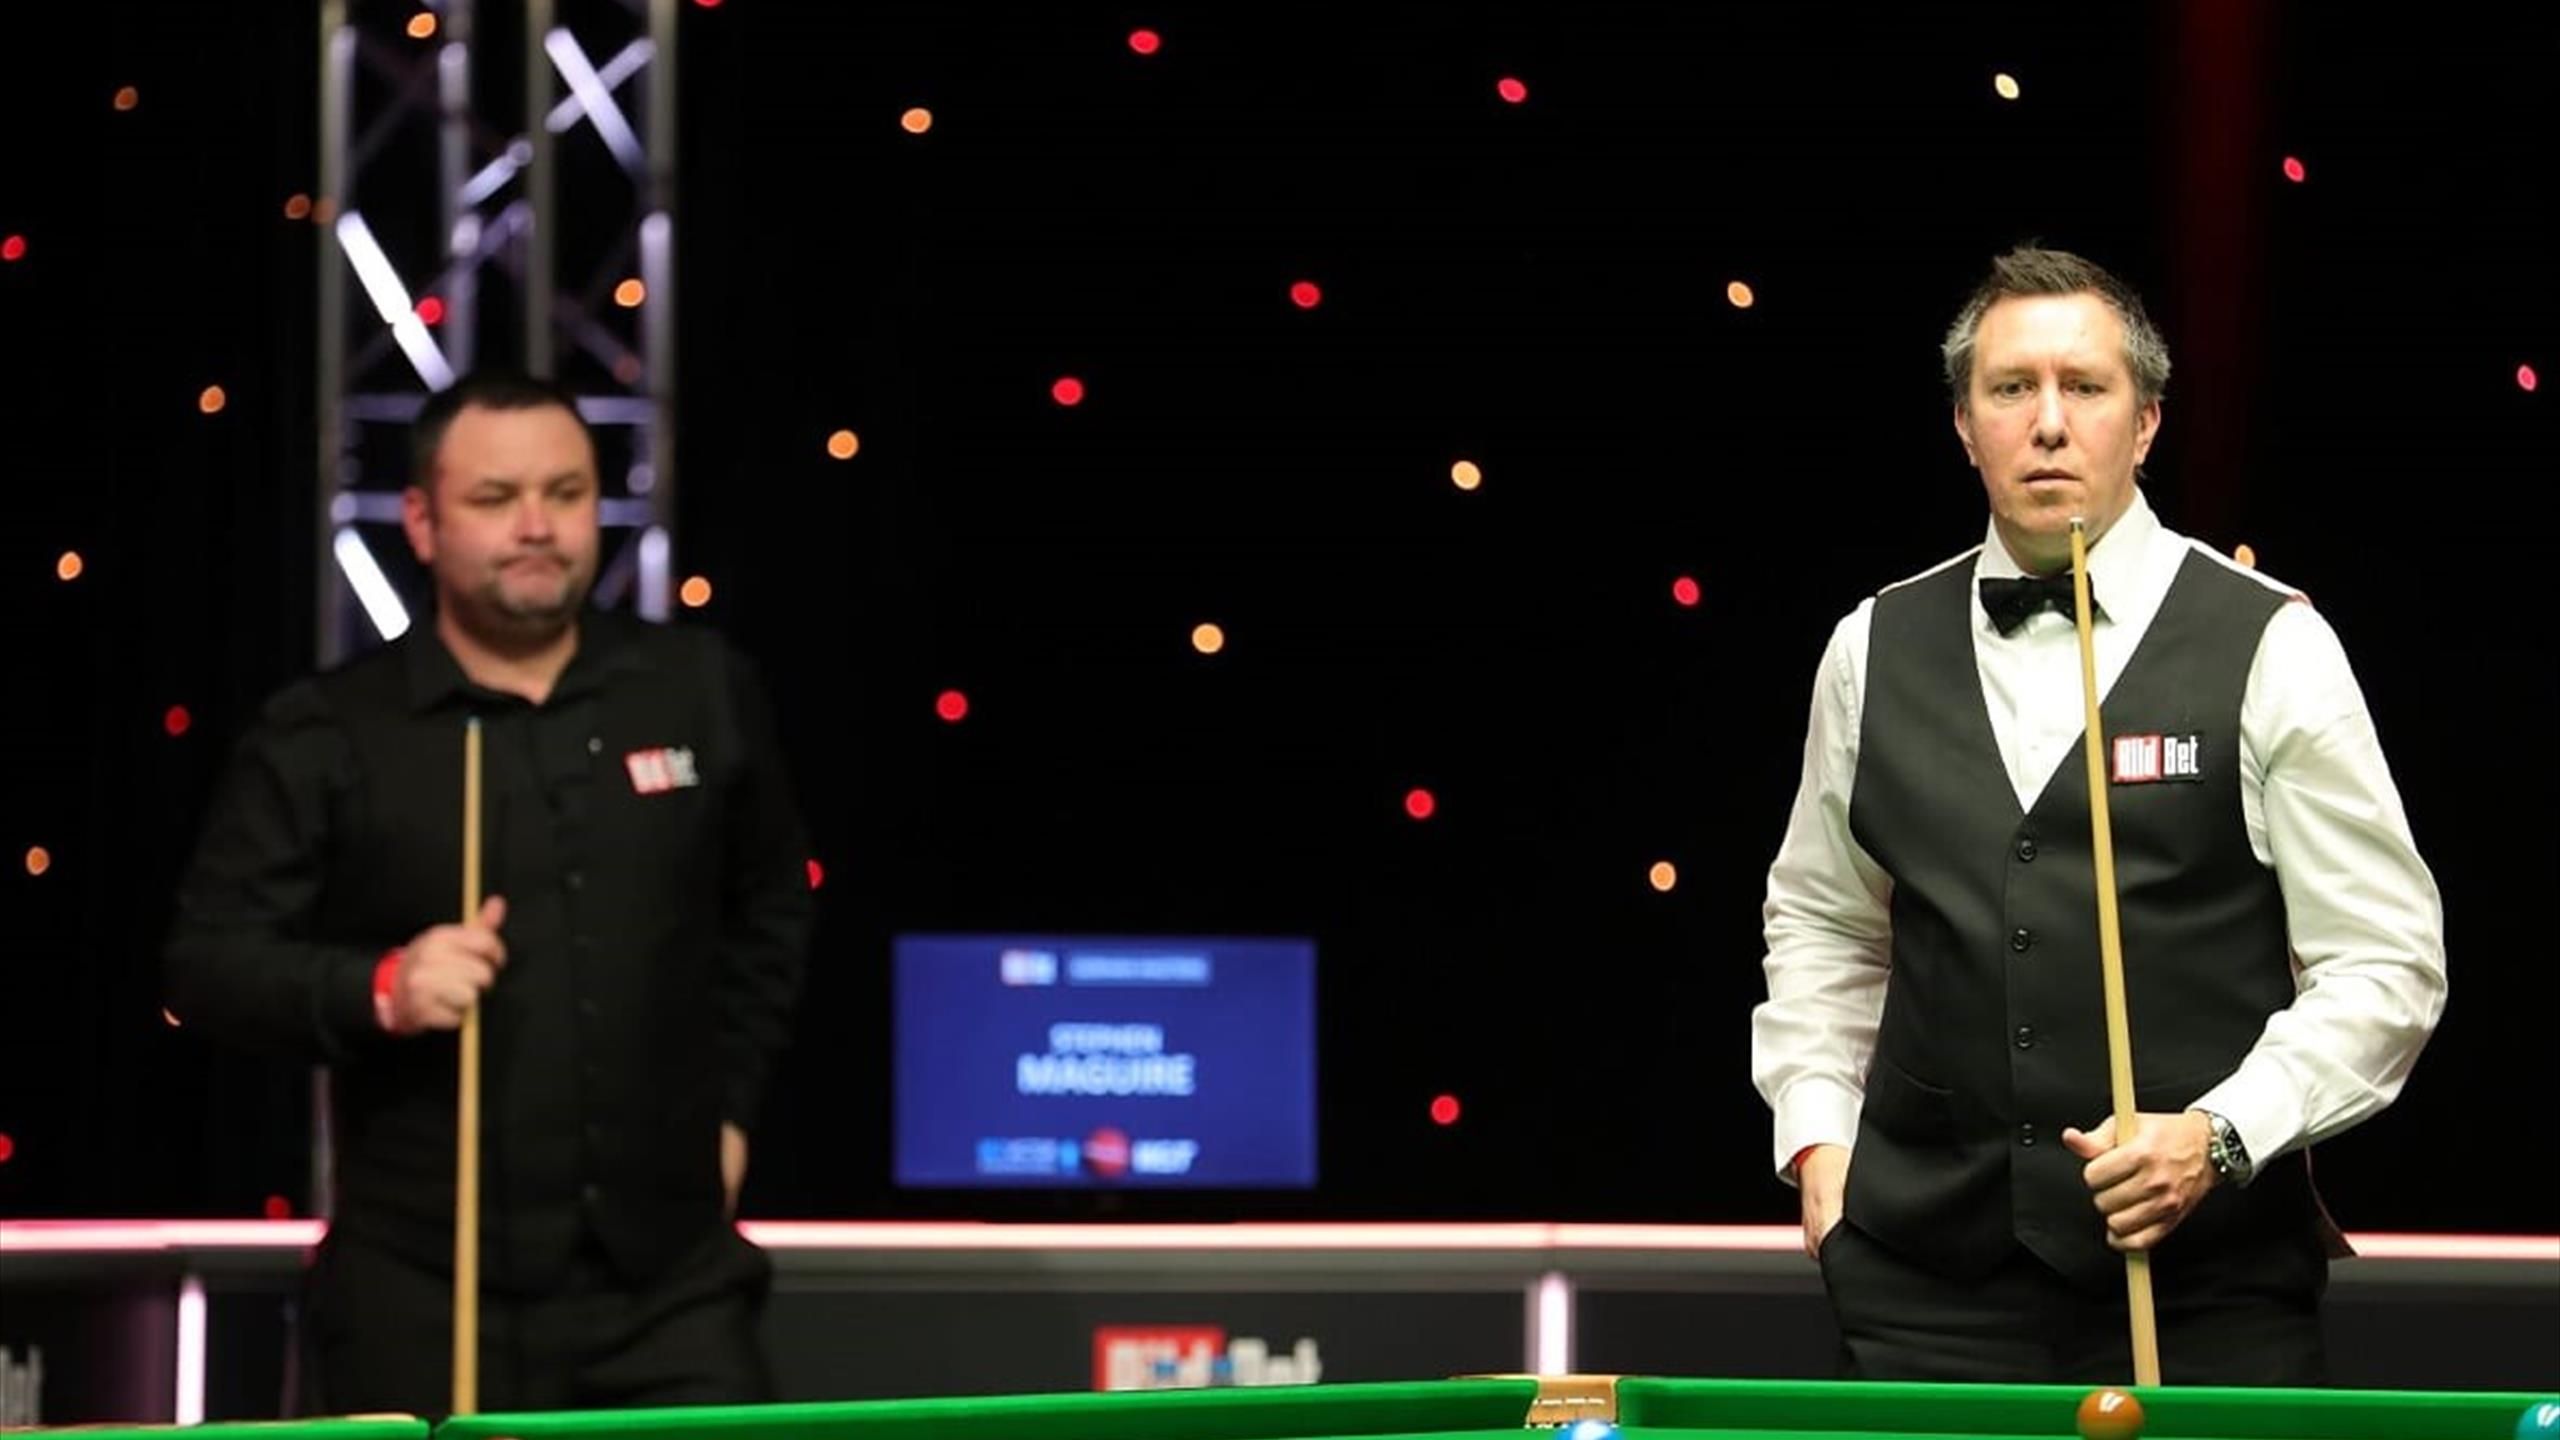 German Masters snooker 2021 - Shaun Murphy, Stephen Maguire crash out in day of shocks